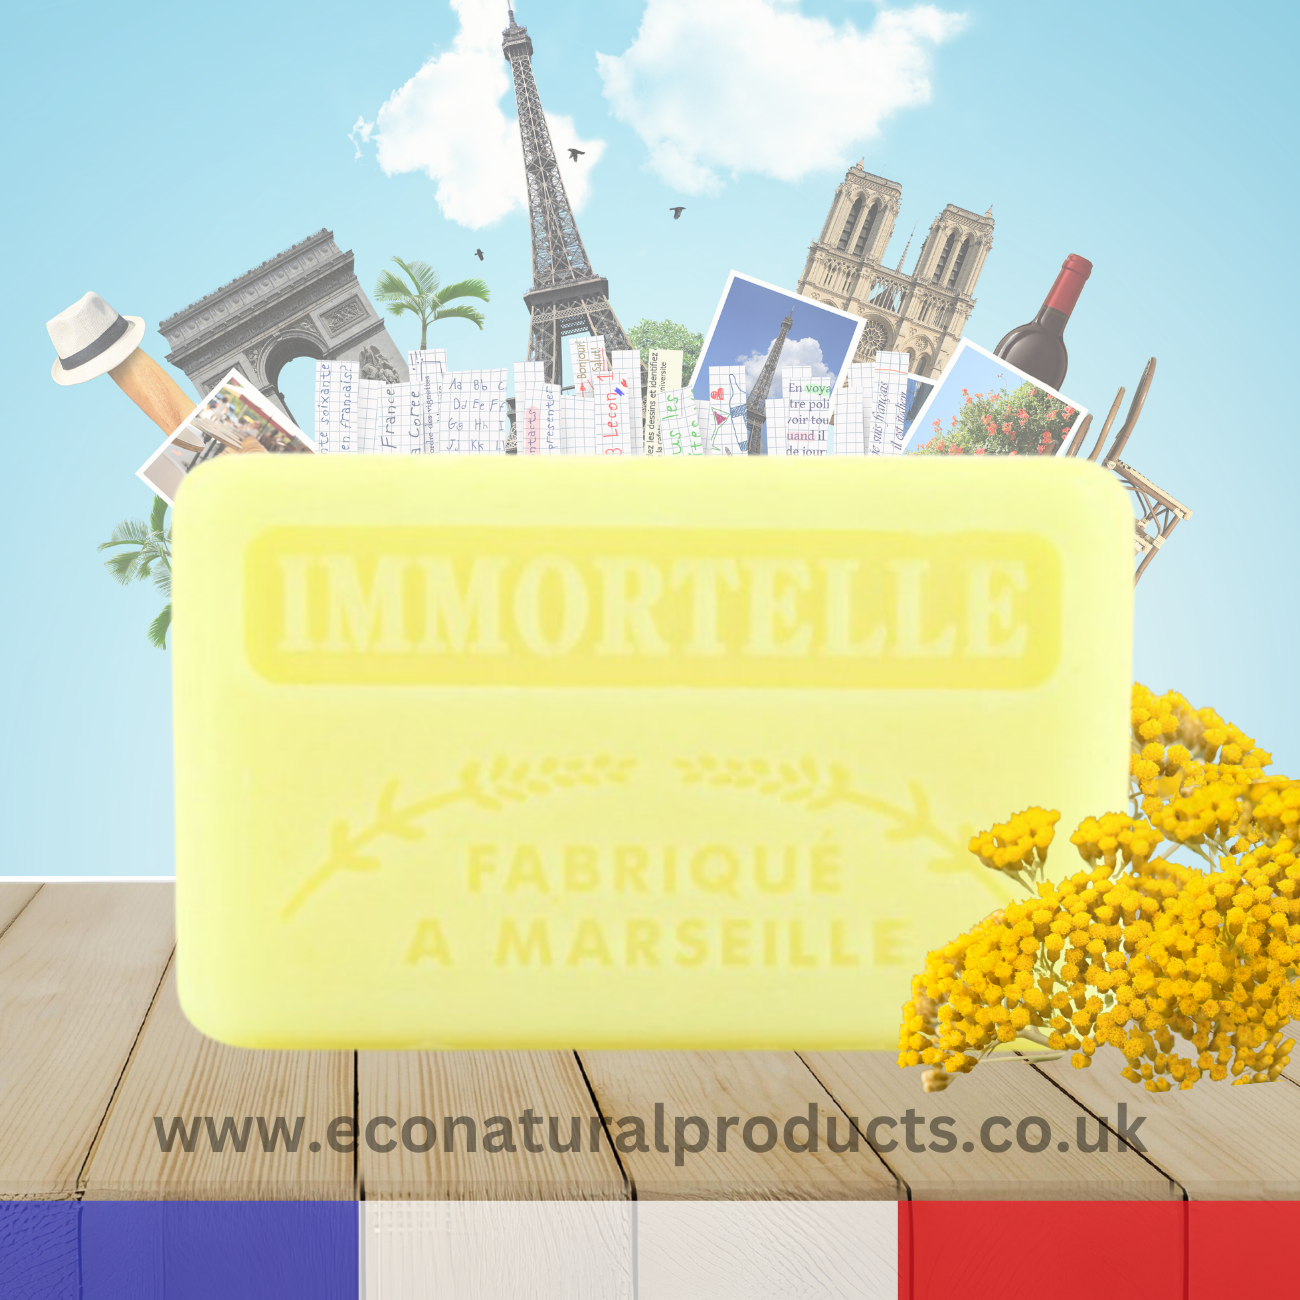 French Marseille Soap Immortelle 125g